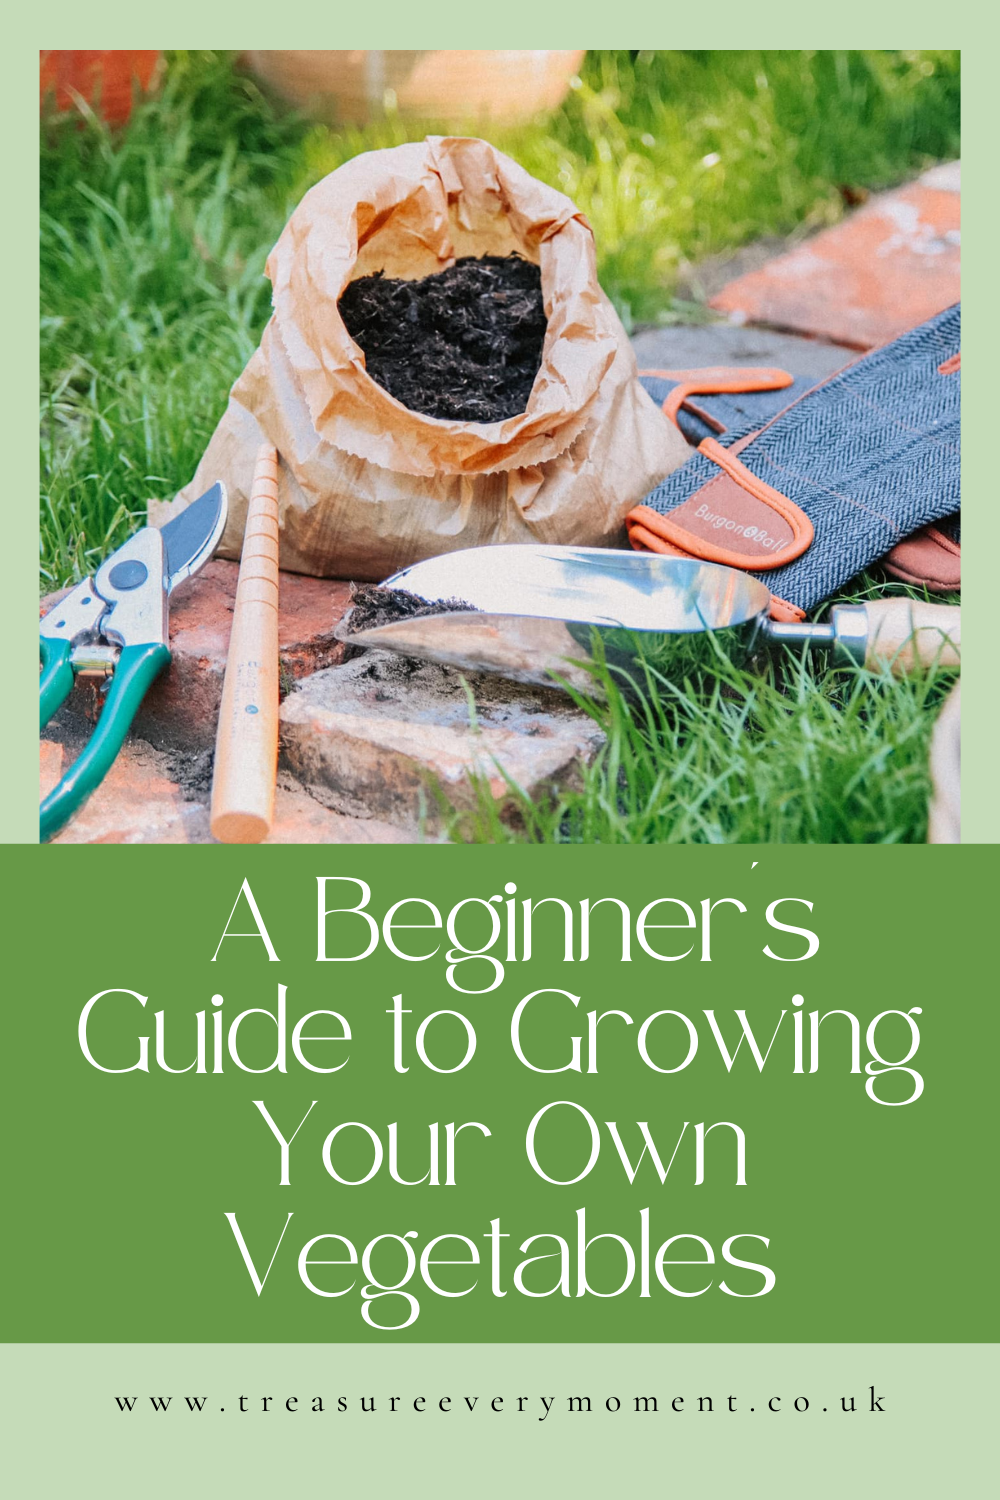 GARDEN: A Beginner's Guide to Growing Your Own Vegetables